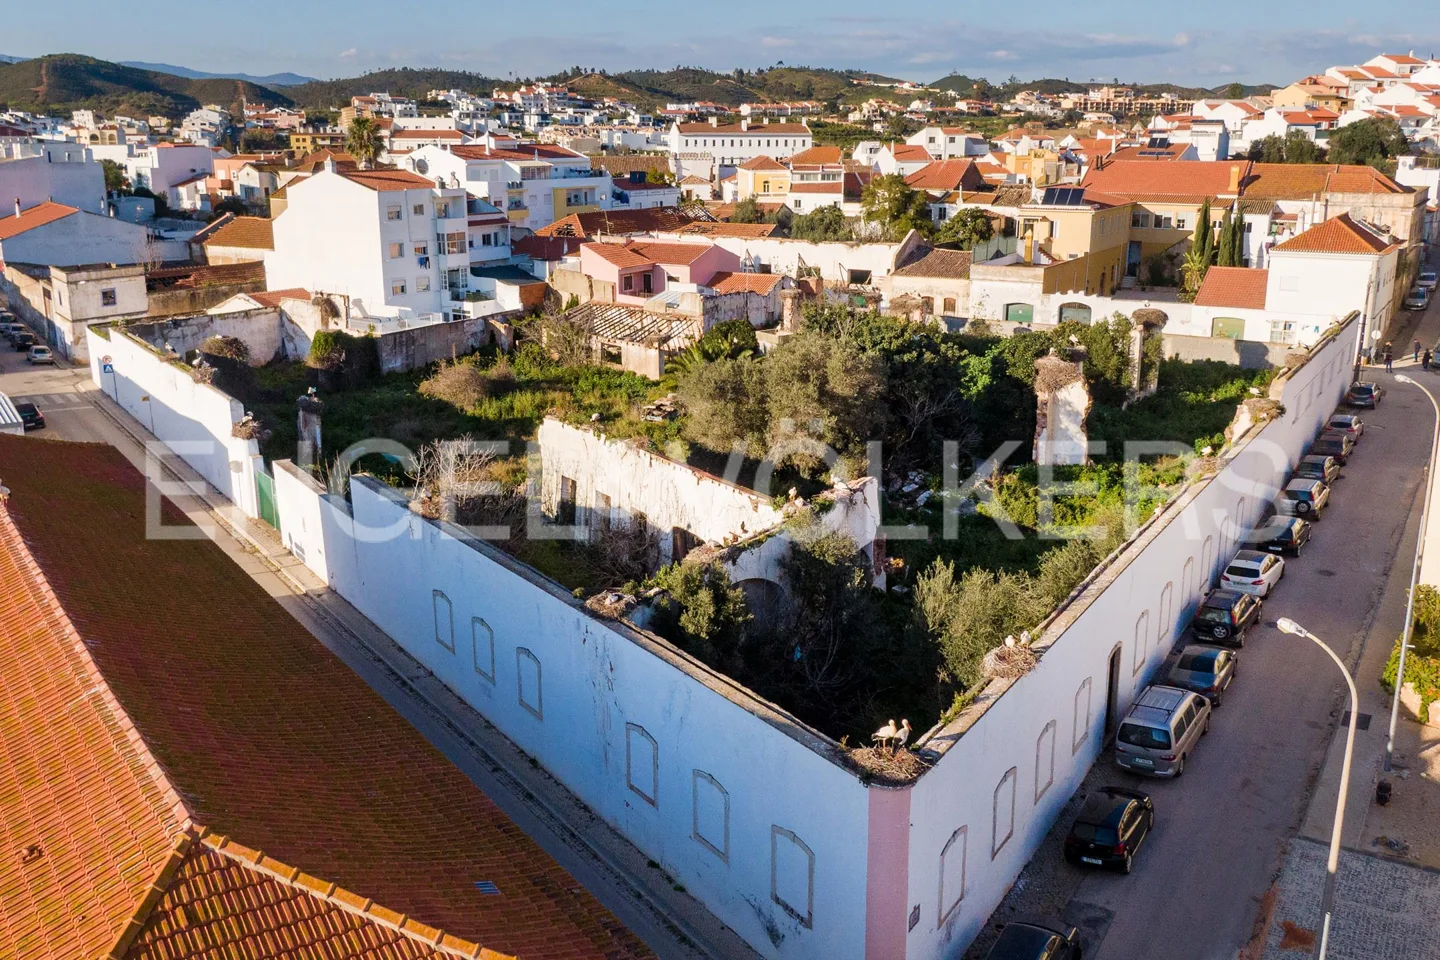 Urban Building for Investment in the Centre of Silves